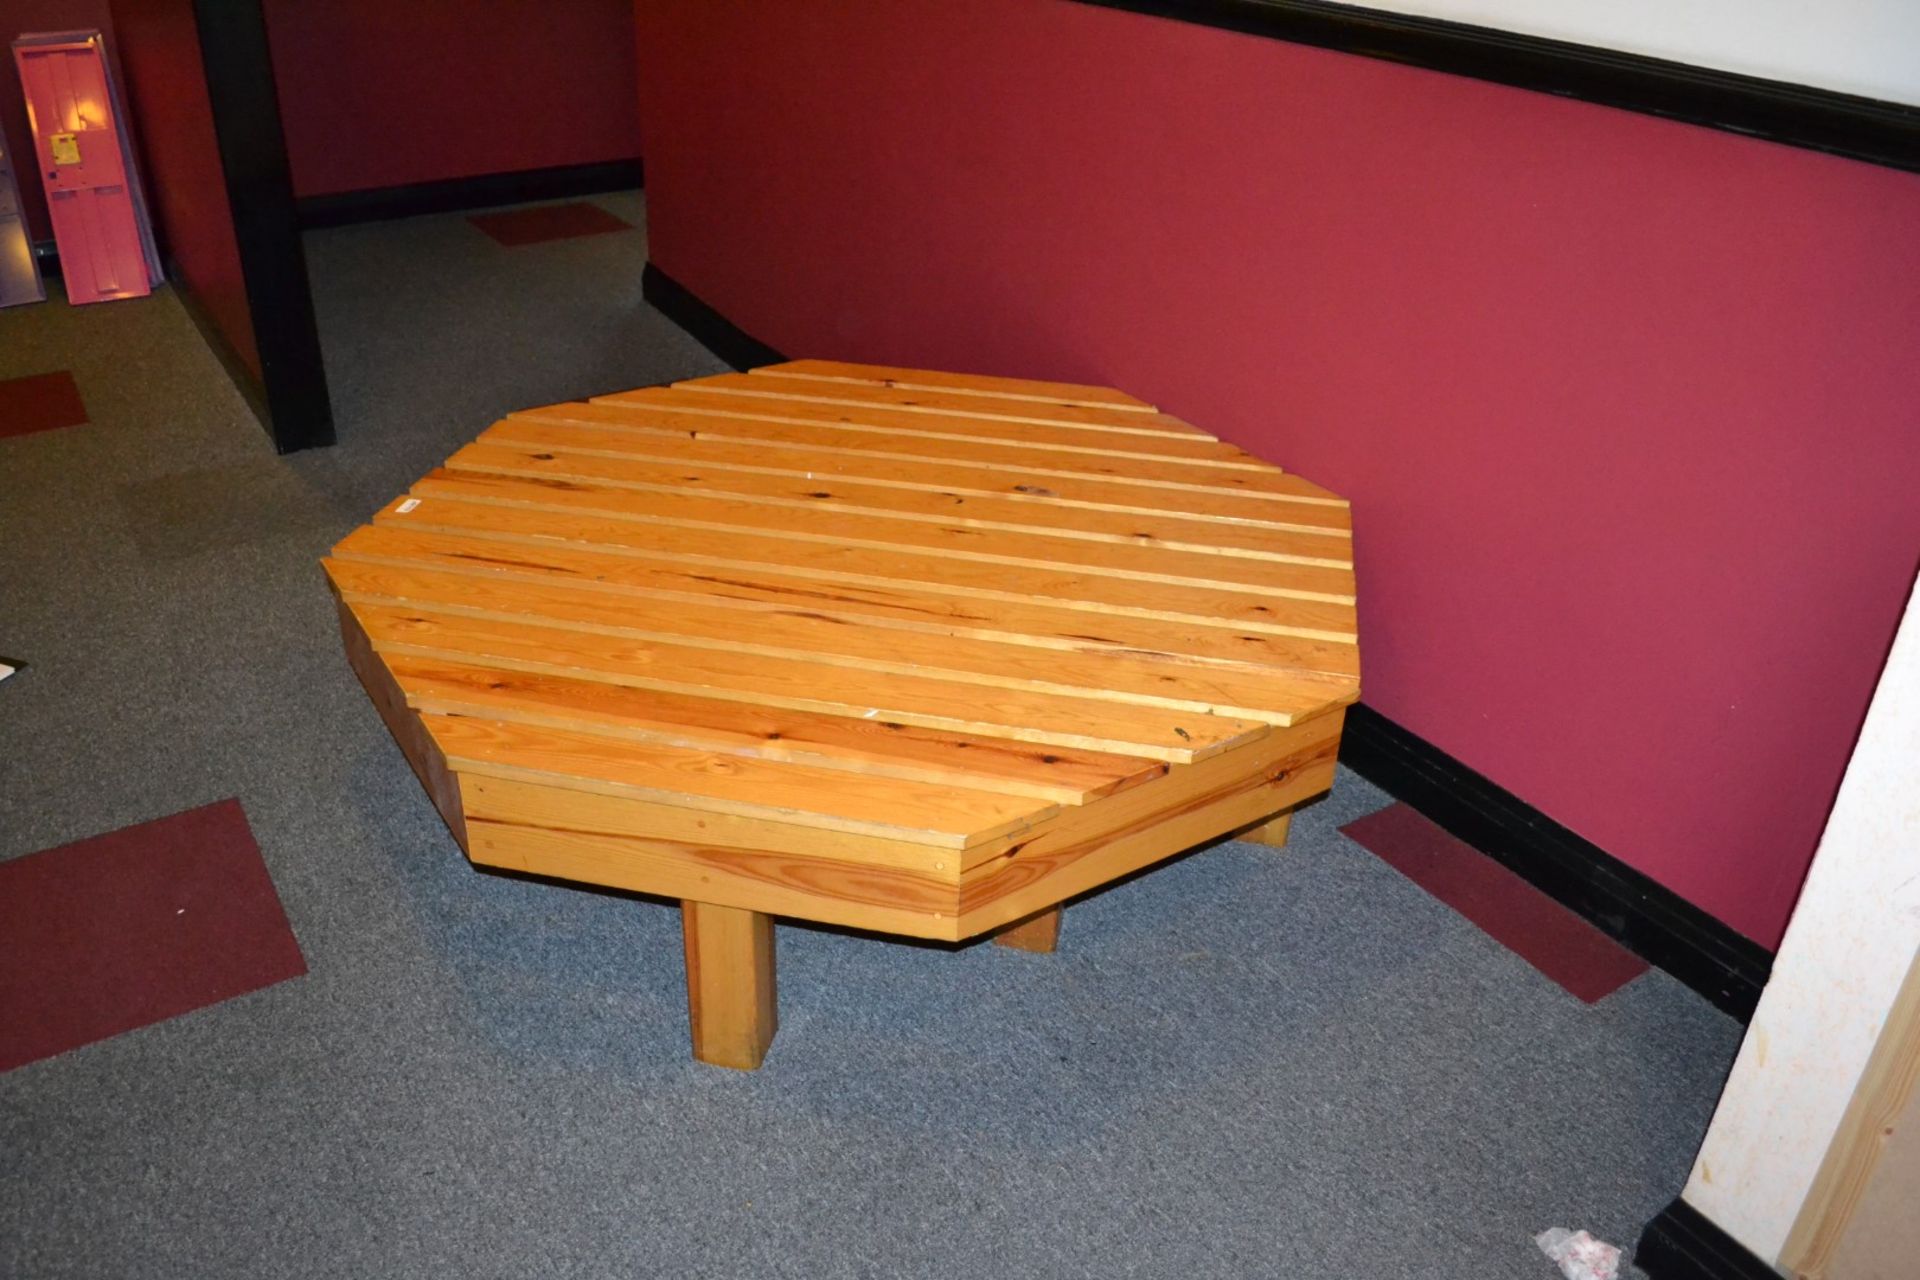 1 x Wooden Hexagonal Changing Room Bench - Dimensions: L150 x H50cm - Ref: J2113/WCR - CL356 - - Image 2 of 2